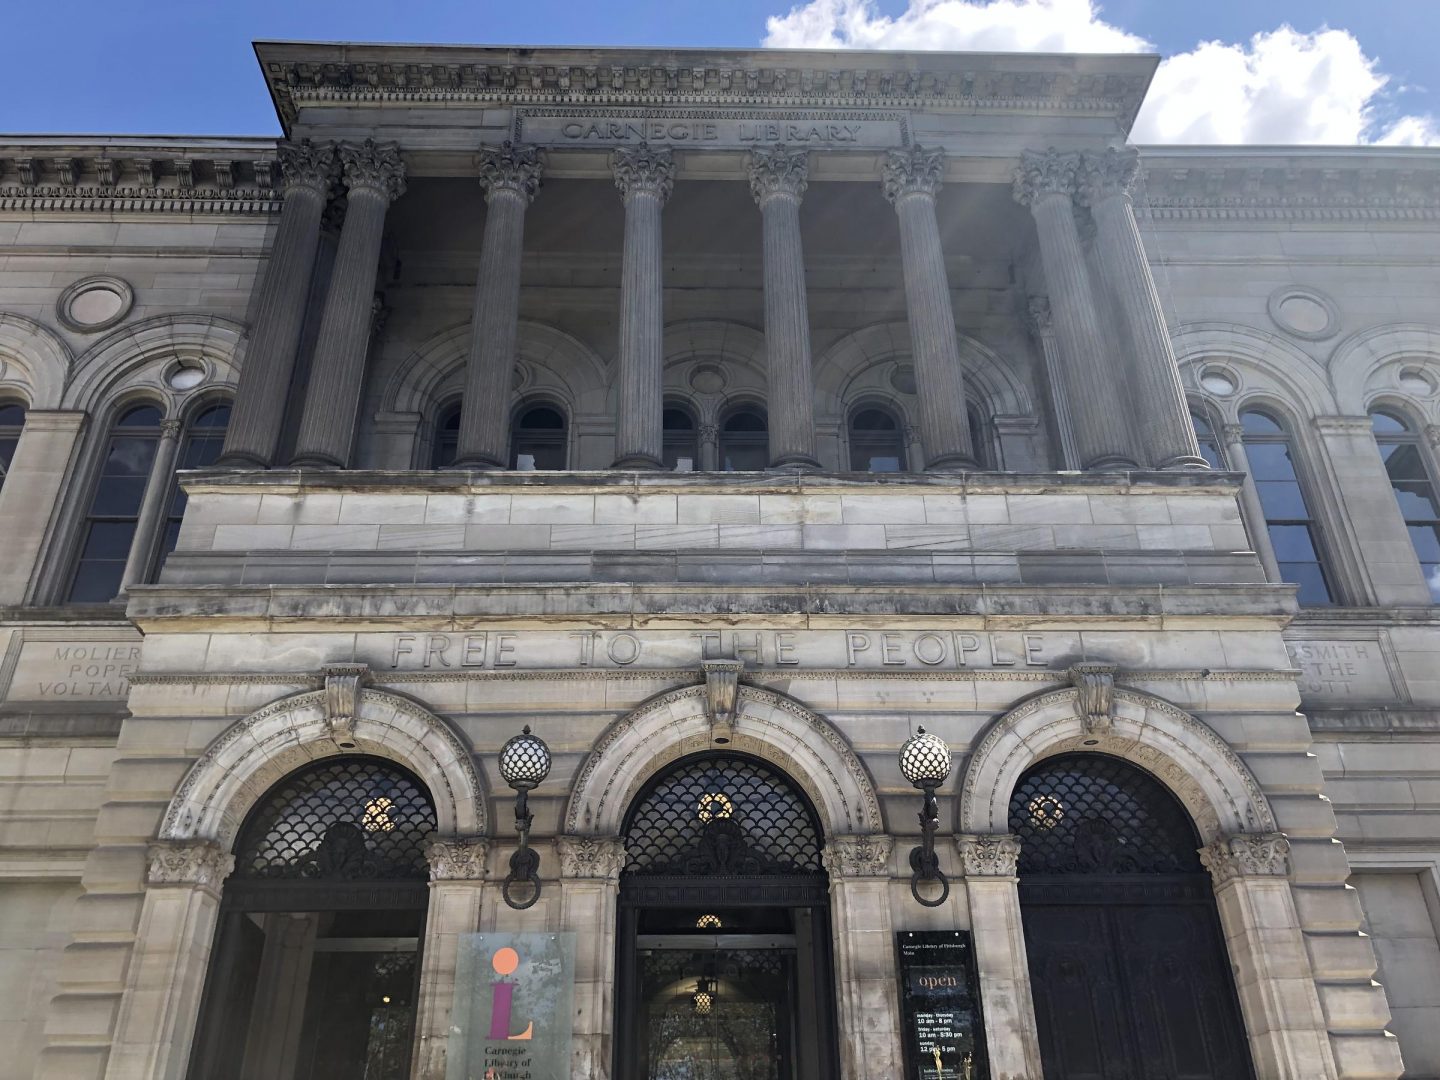 The Carnegie Library of Pittsburgh branches see more than 2.9 million visitors each year. The main branch in Oakland has undergone several transformations, most recently in 2004, when many of the building's original artifacts were uncovered and restored.